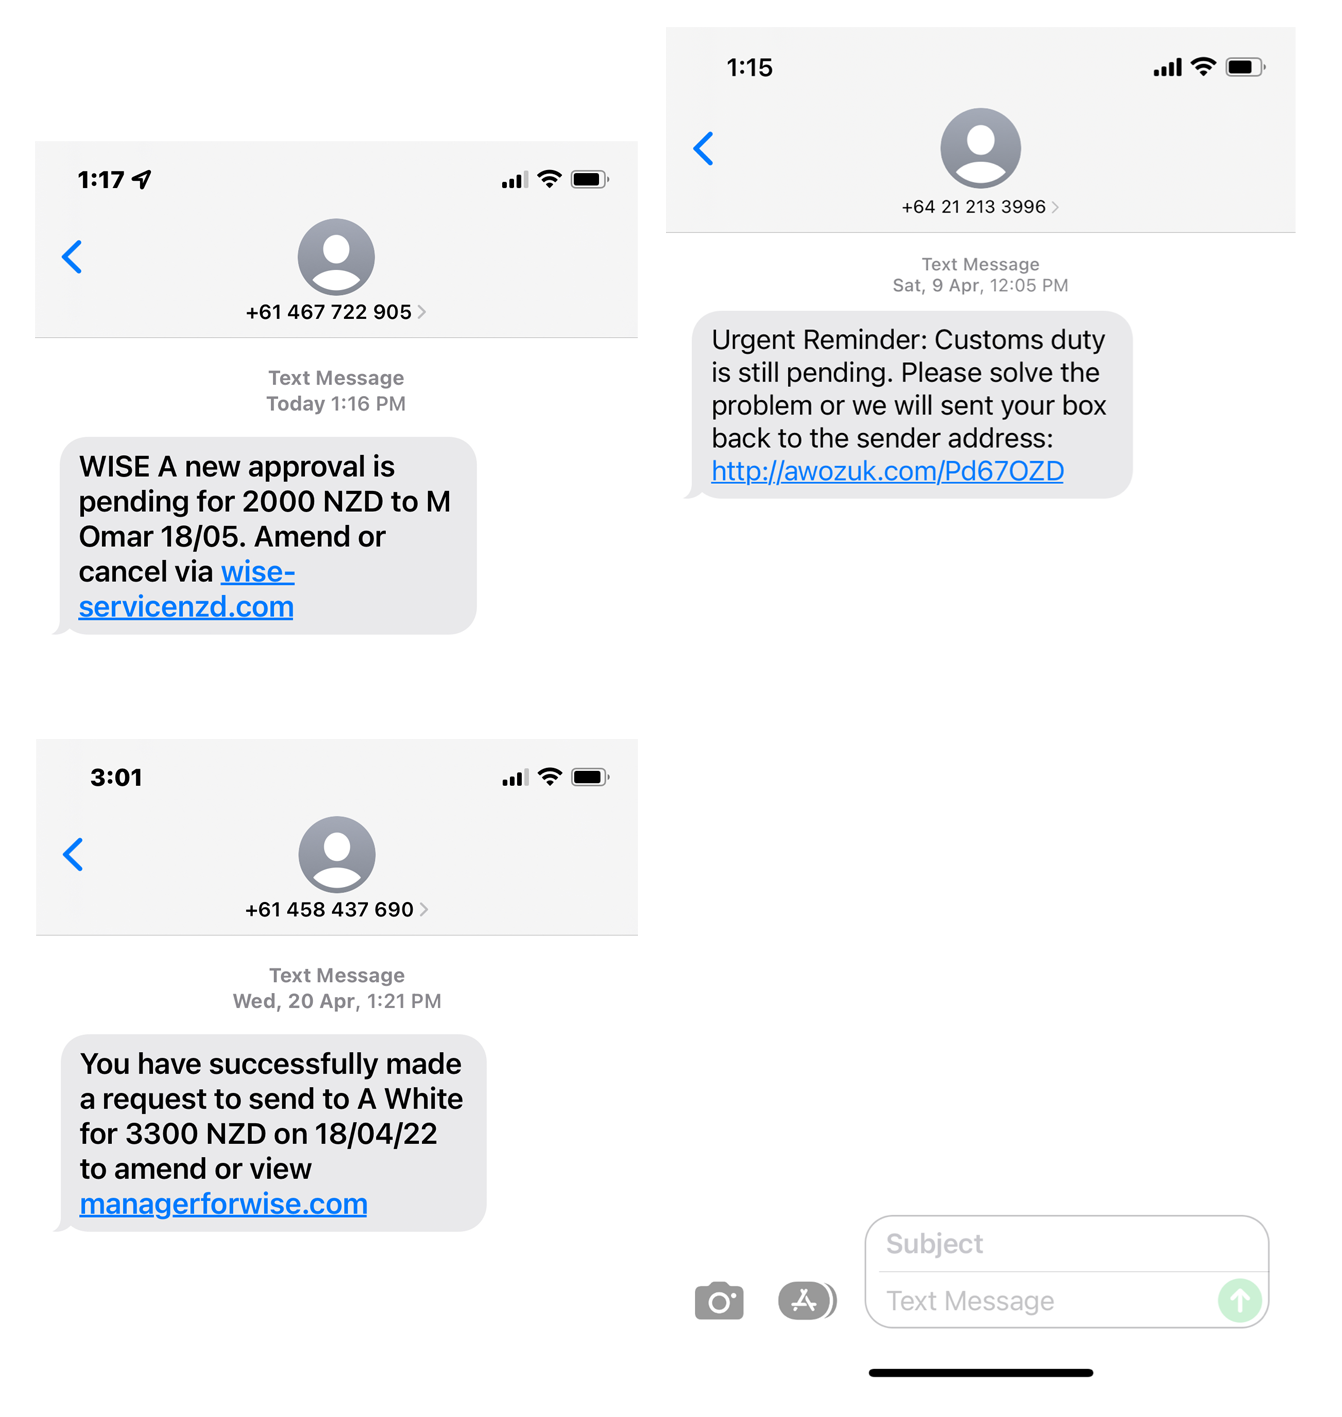 examples of FluBot Spam messages